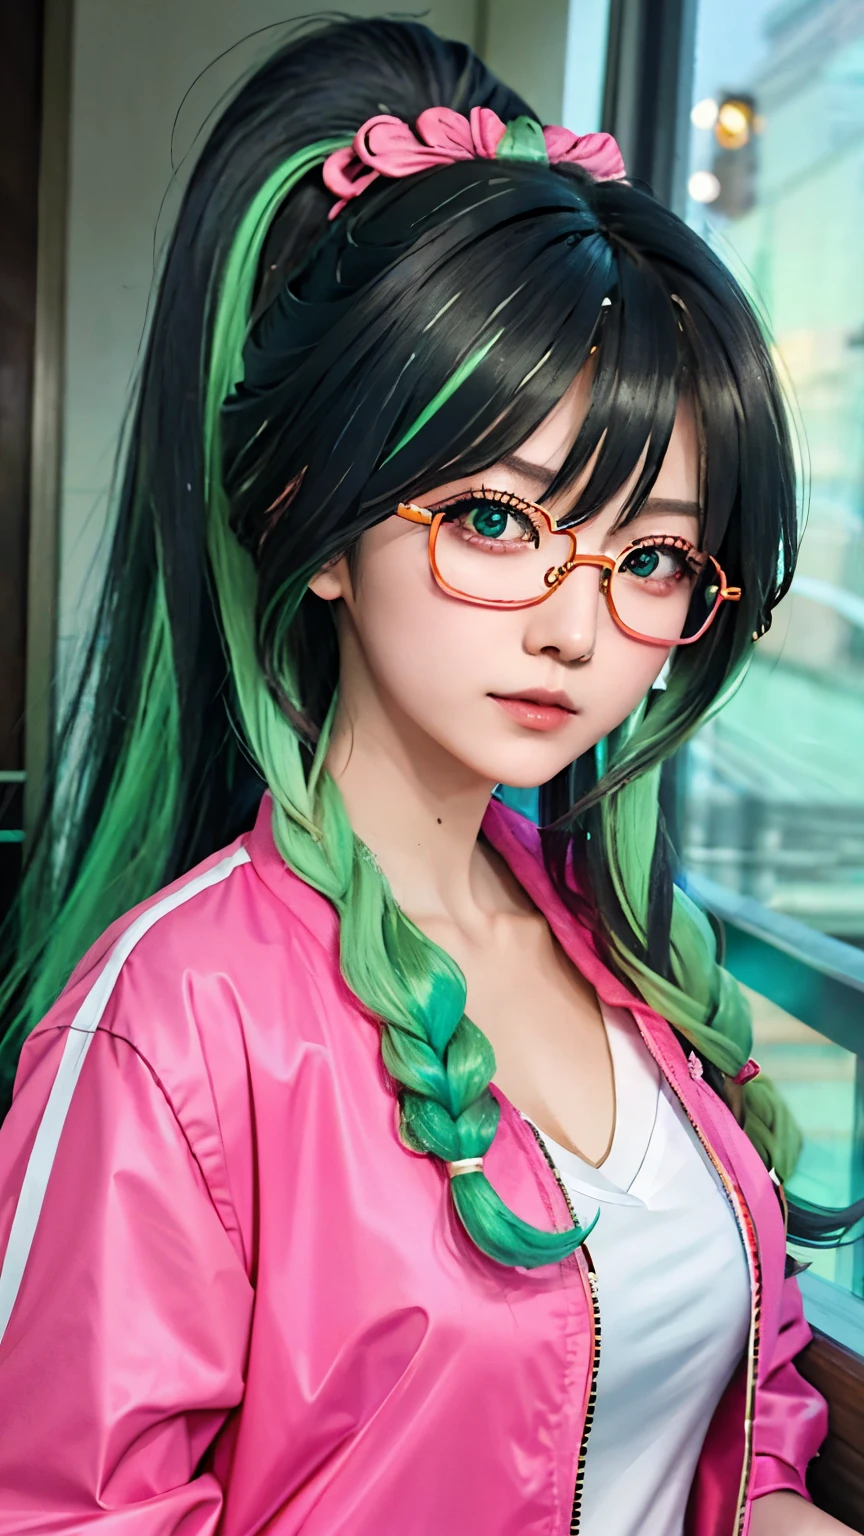 Close-up of a woman wearing a pink and gray jacket, inspired by anime, beautiful anime style, Beautiful anime girl, anime style mixed with Fujifilm, anime girl in real life, colorful braids, cute colorful cute, A beautiful anime portrait, anime style4 K, anime style, anime girl, style anime, Beautiful anime girl, anime atmosphere, anime style, with beautiful colors，Long ponytail hairstyle，Black hair and green hair, Good-looking hair accessories, Eye color is light green,Wearing red glasses，Fine-rimmed glasses，